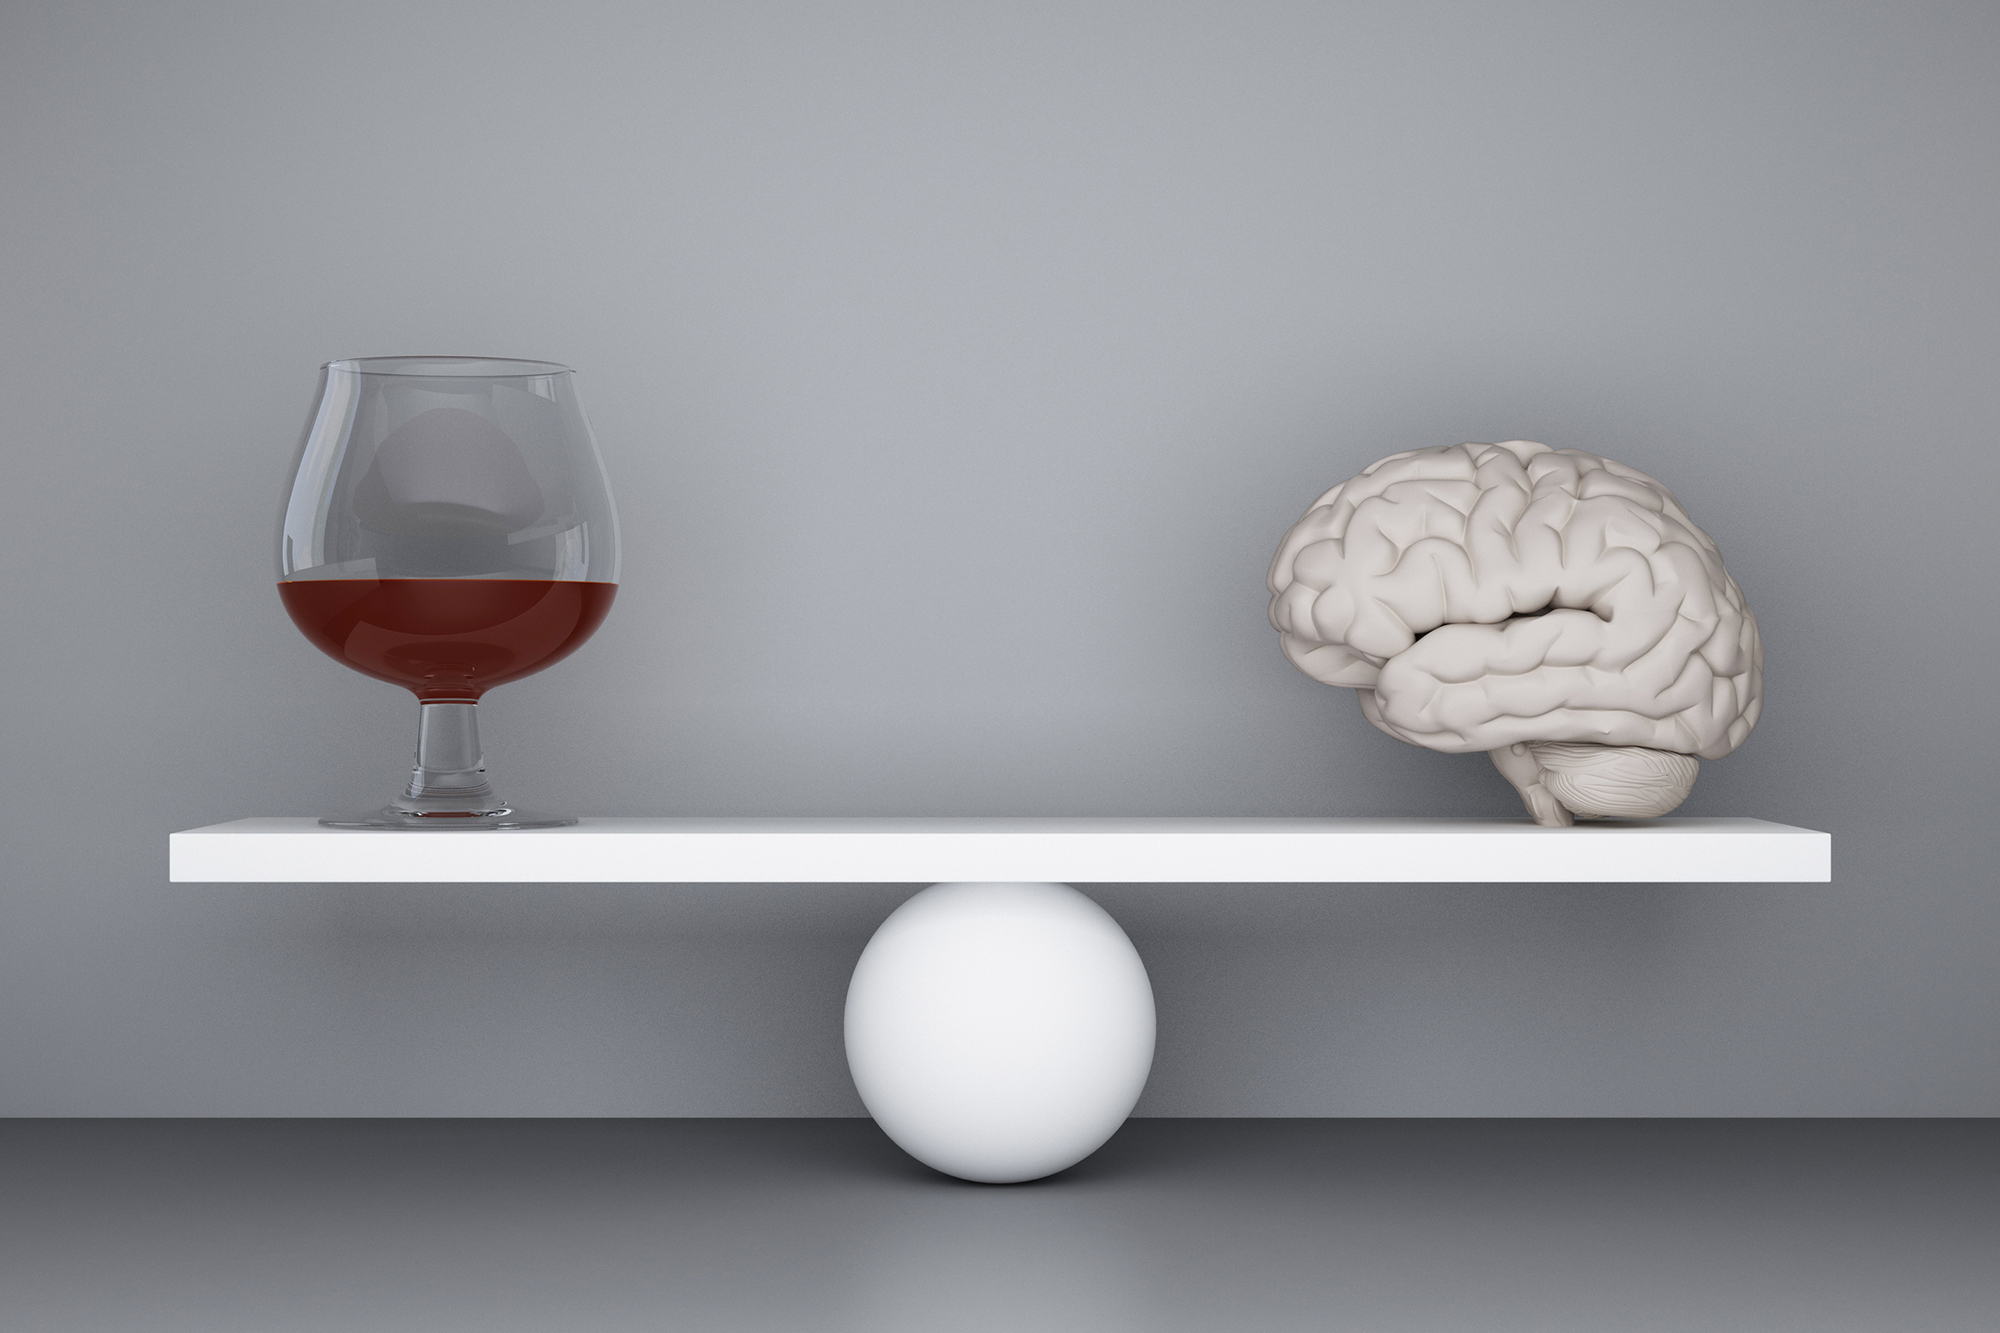 A scale with an alcoholic beverage on one side and a brain on the other